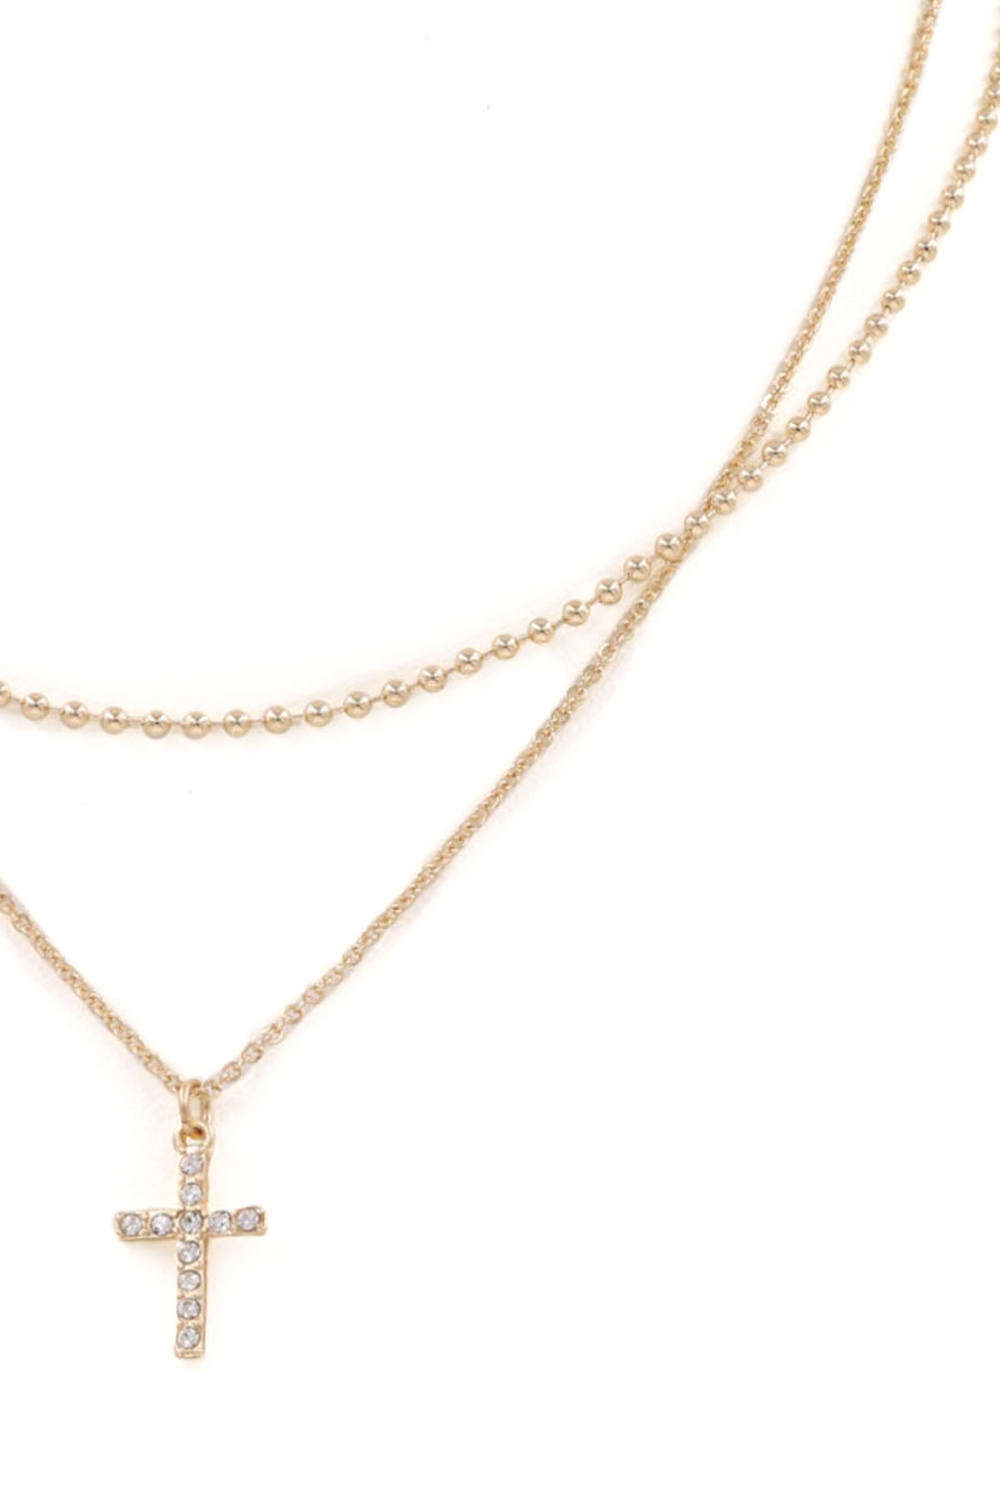 GOLD Rhinestone Cross Necklace - Necklaces